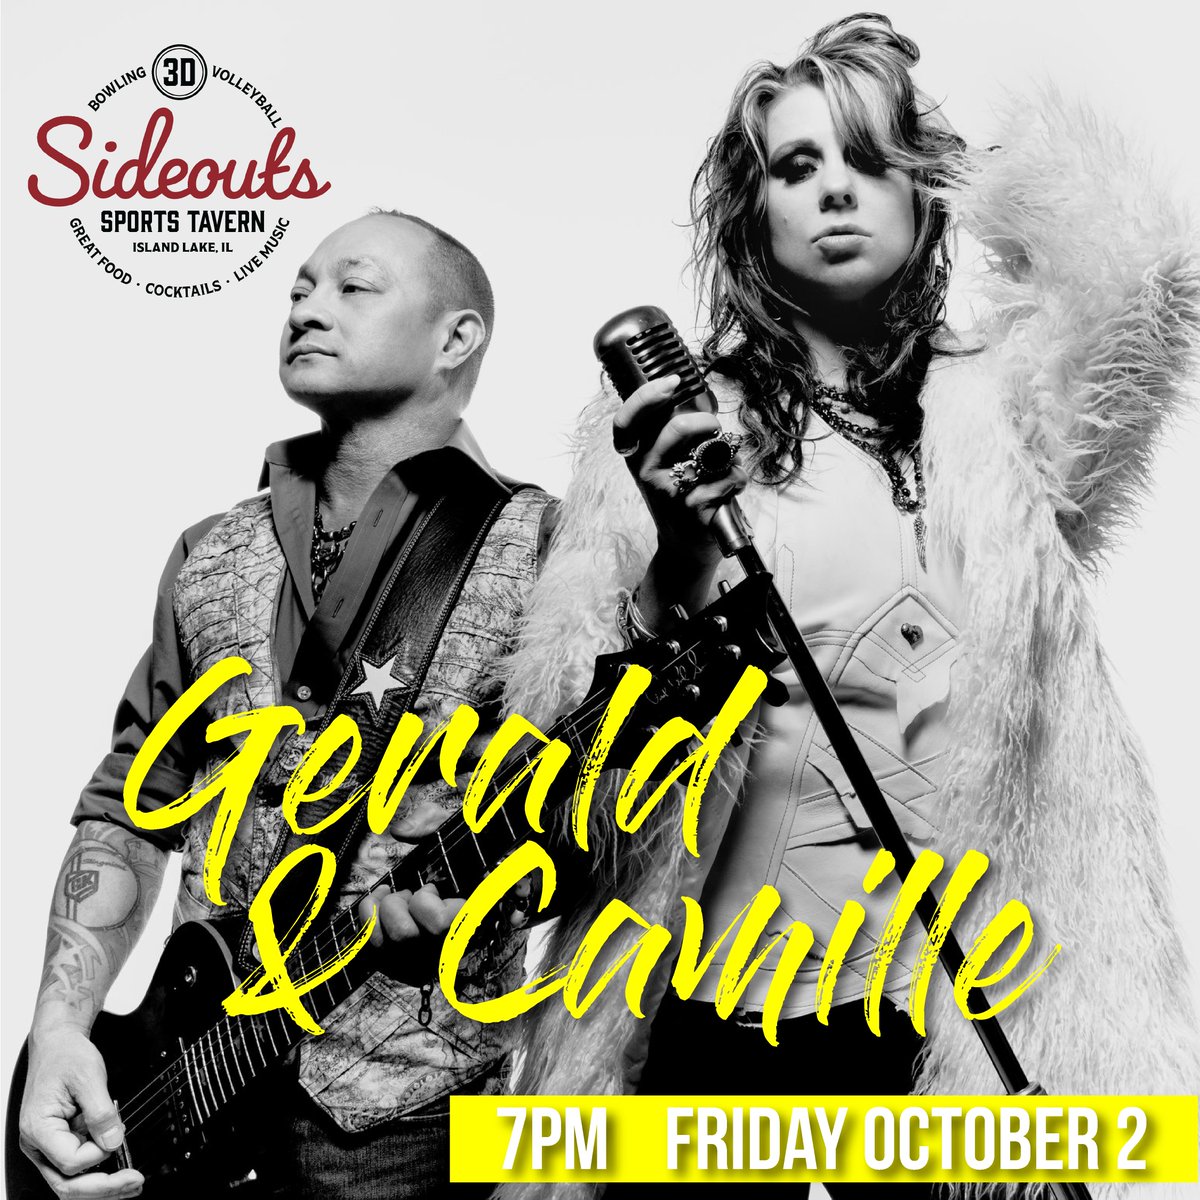 Guess who's back back back? Back again. @Gerald and Camille - Acoustic Duo! Classic Rock, pop, rock and country collide for an awesome Friday night! #sideouts #sideoutssportstavern #islandlake #acoustic #geraldandcamille #livemusic #friday